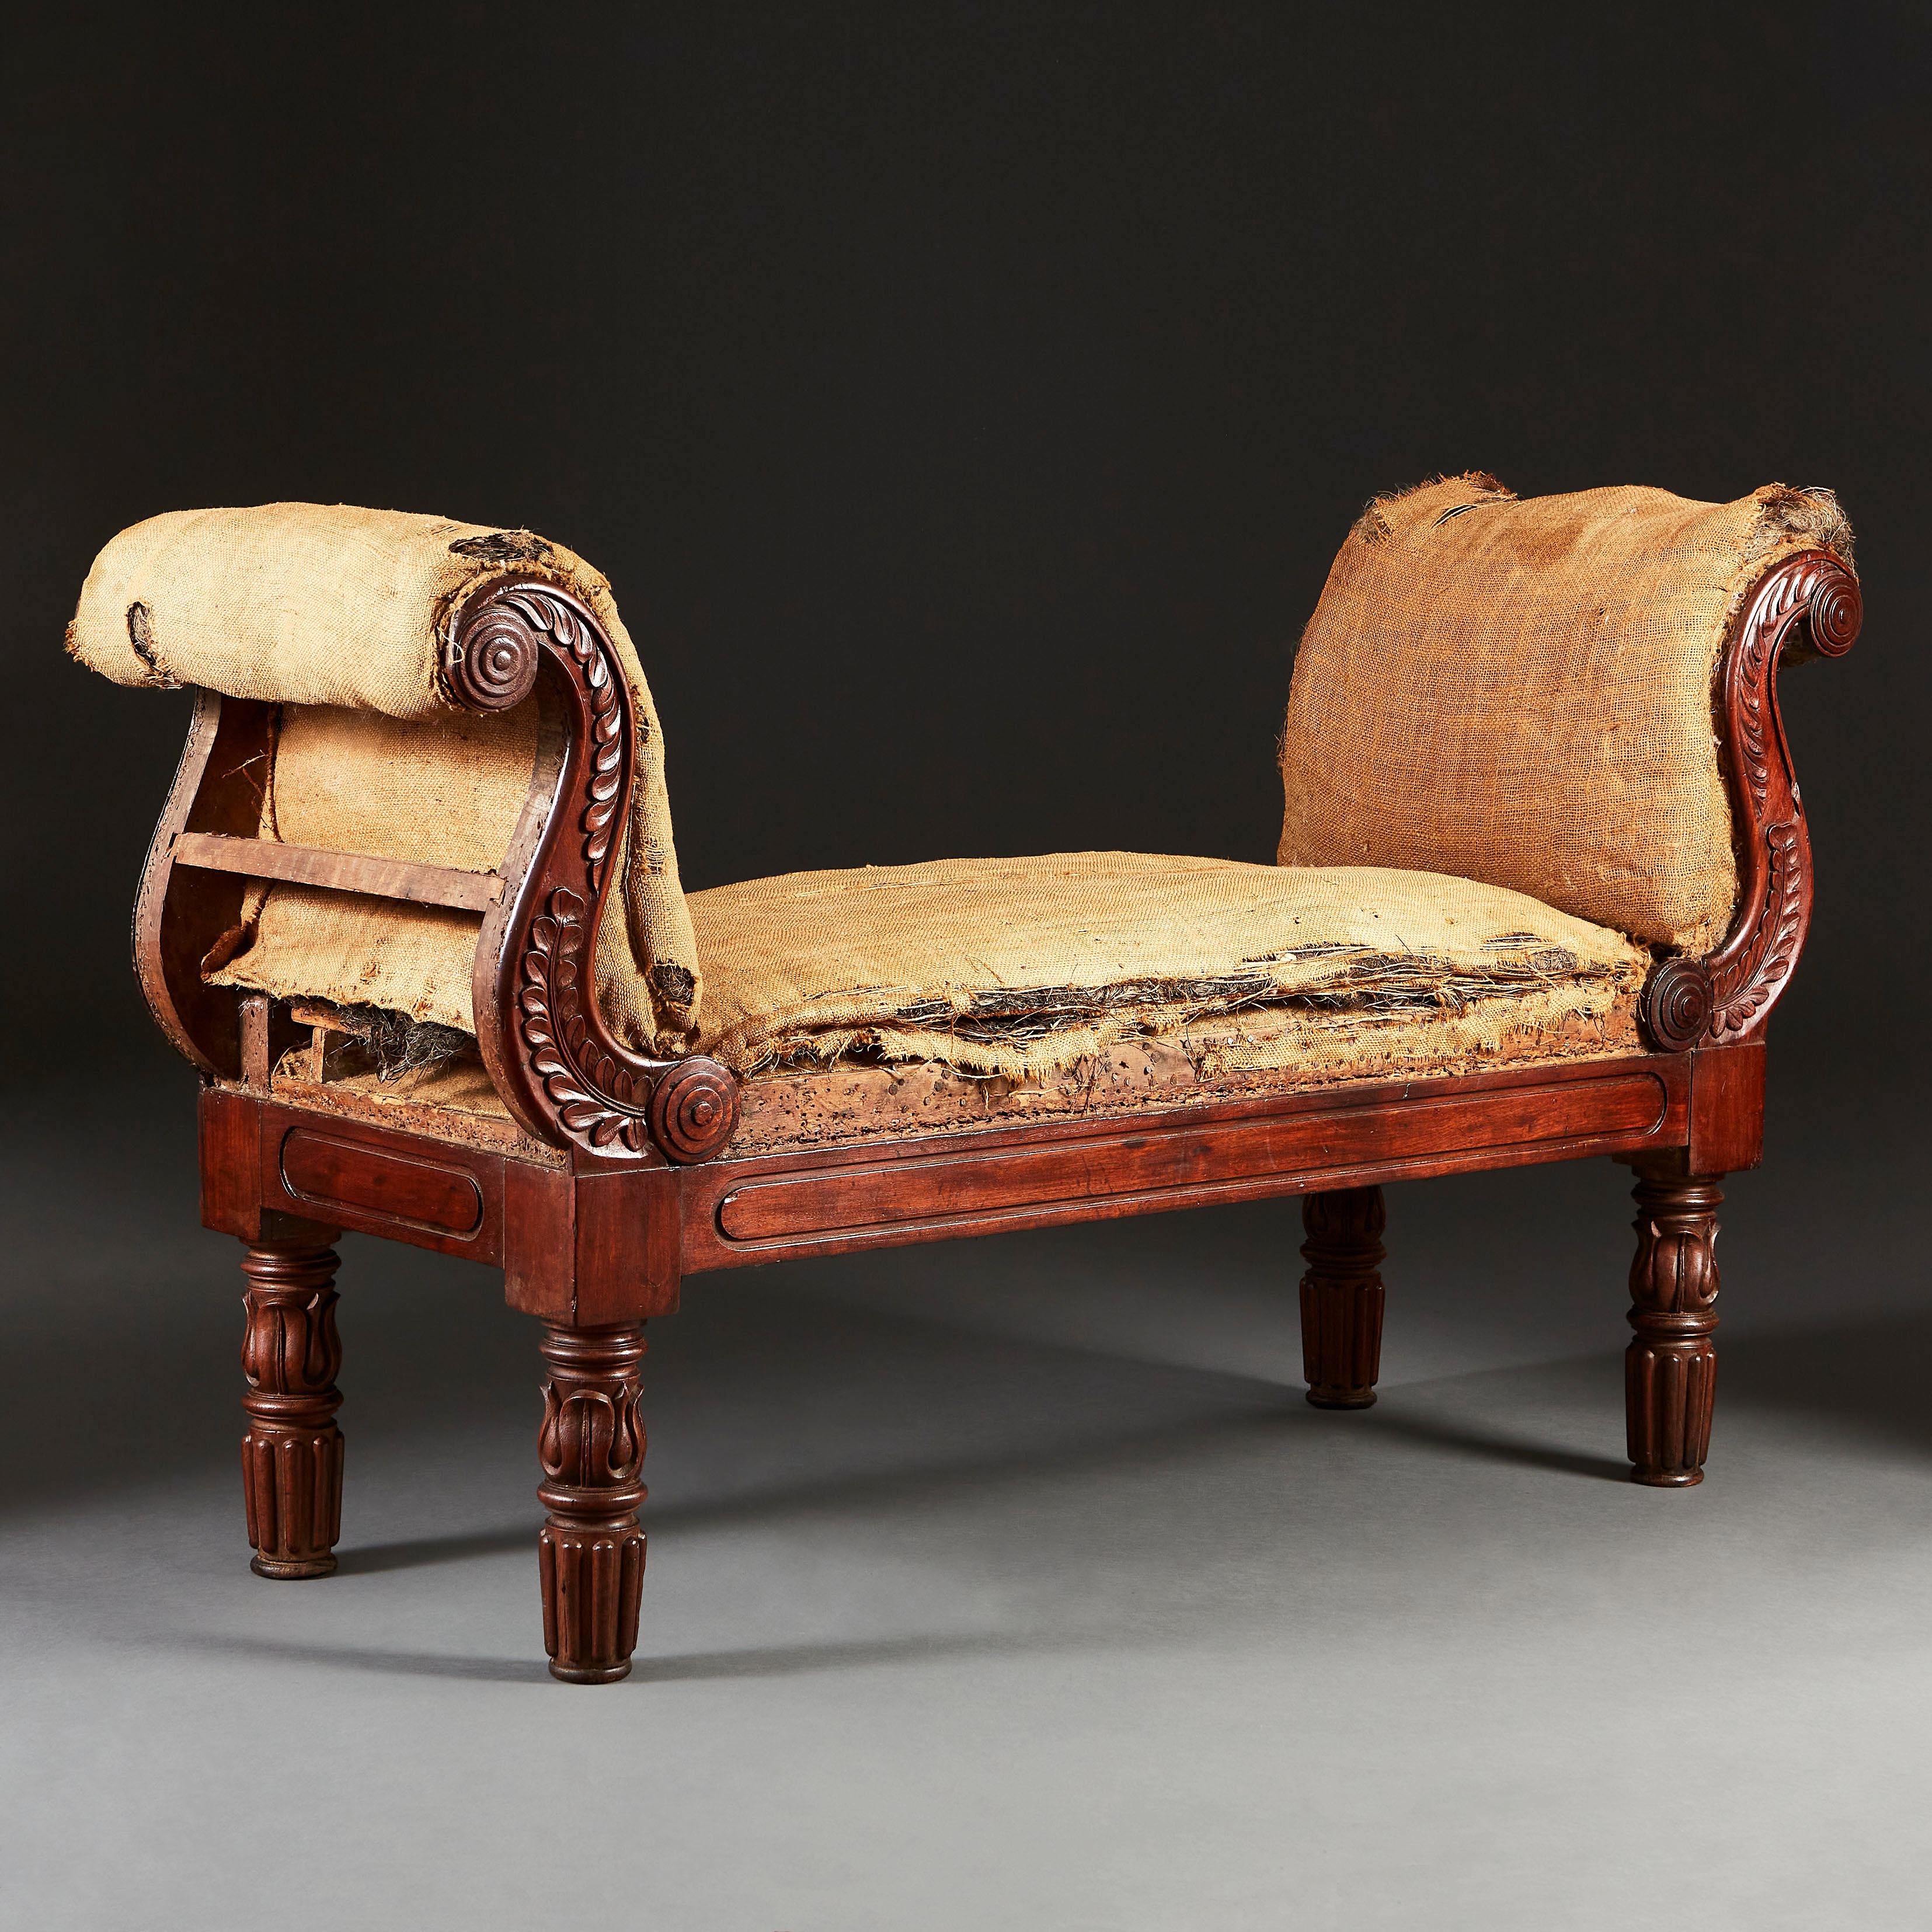 A fine mid 19th century mahogany window seat with scrolling arms carved throughout with fine foliate designs, turned legs with stylized acanthus. The horsehair upholstered seat, now requiring upholstery.